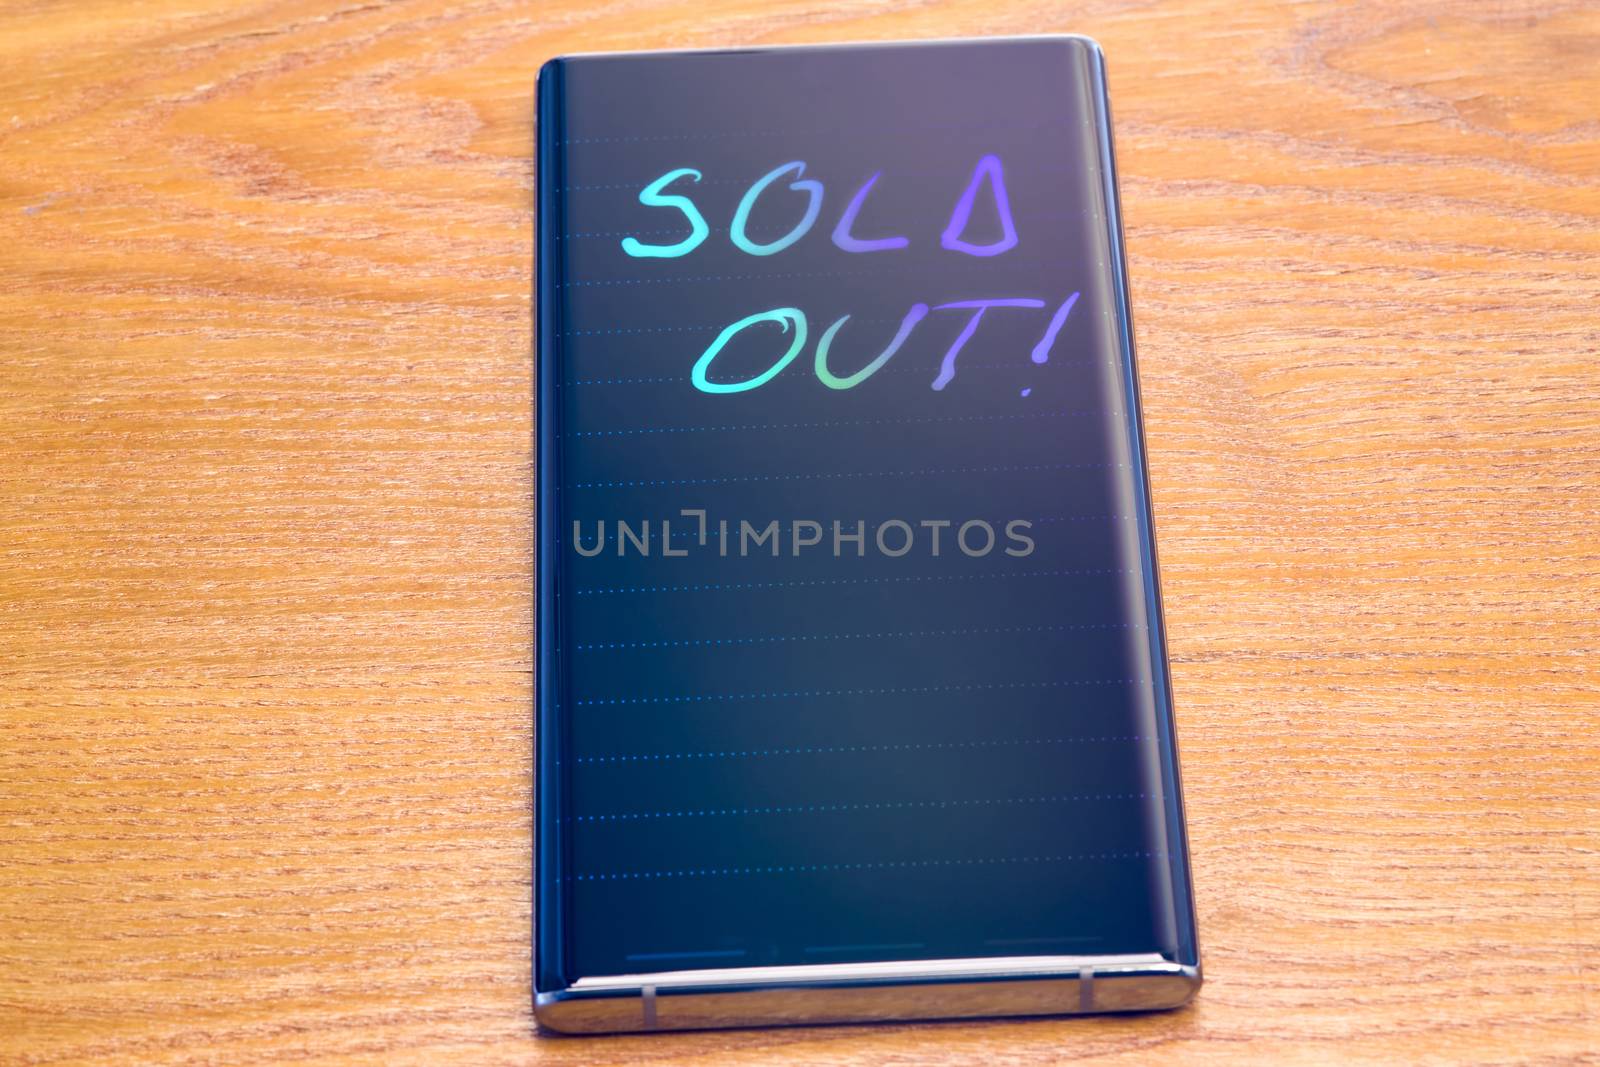 Sold out message on generic mobile phone display.